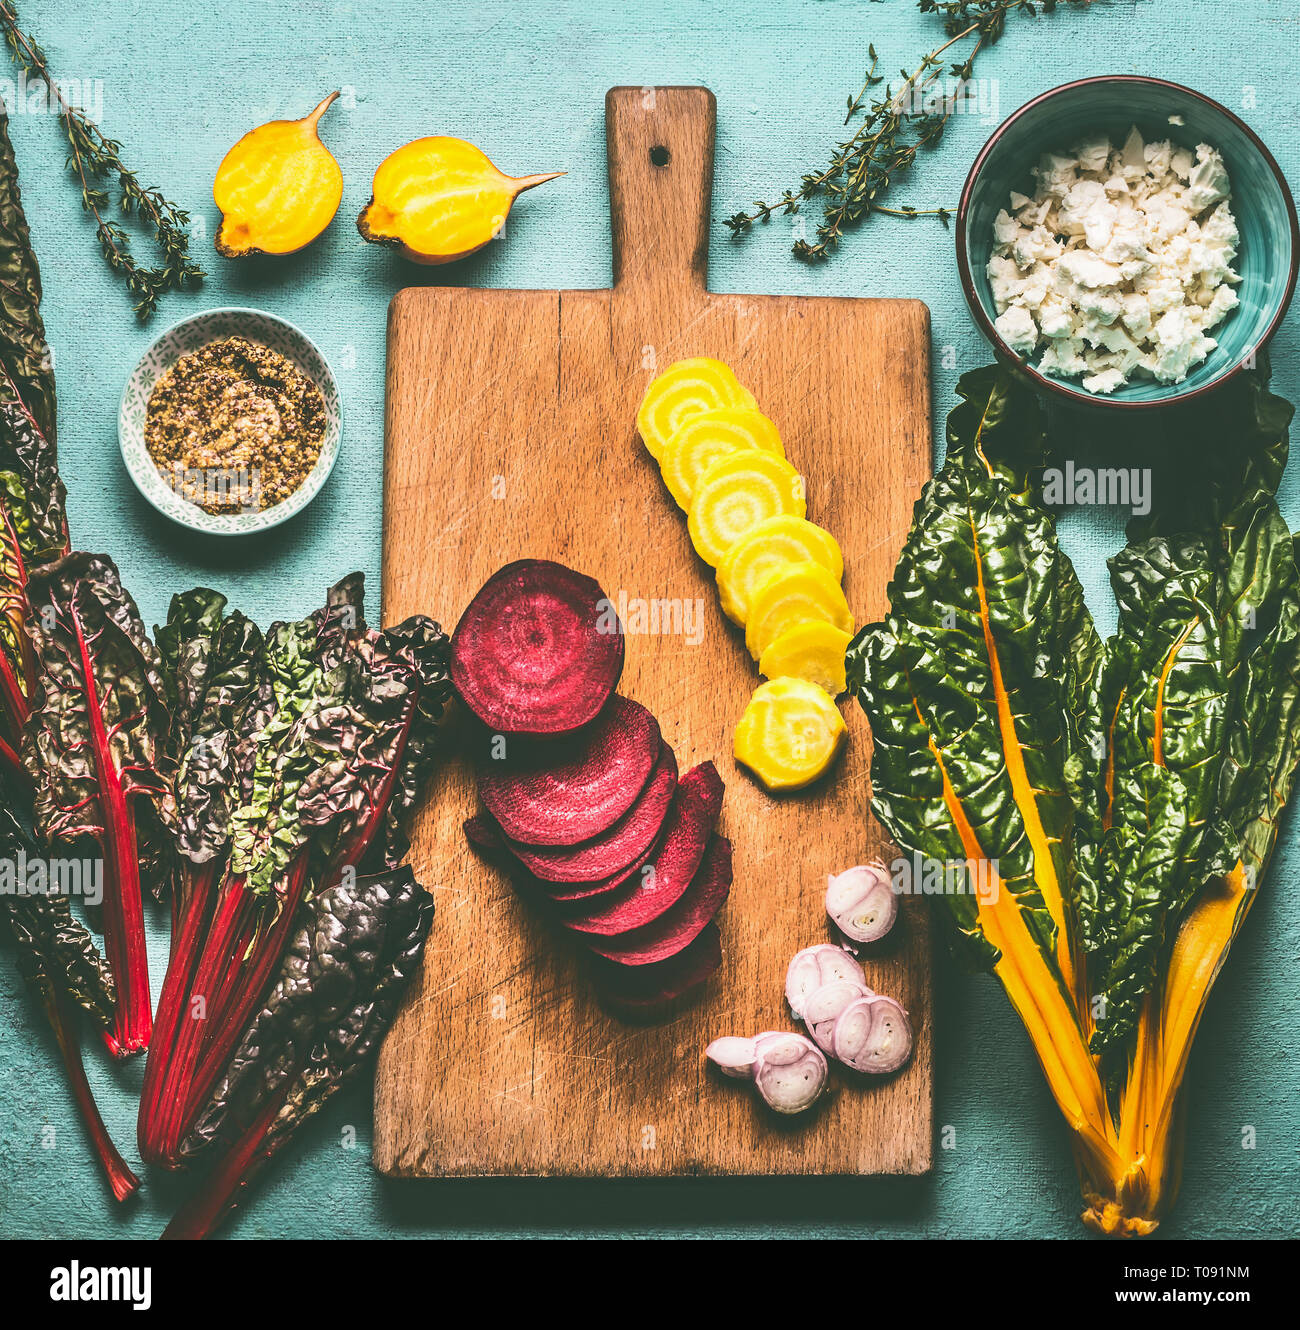 Colorful sliced beetroots with greens ingredients on kitchen table with cutting board, top view. Healthy vegetarian eating and cooking Stock Photo